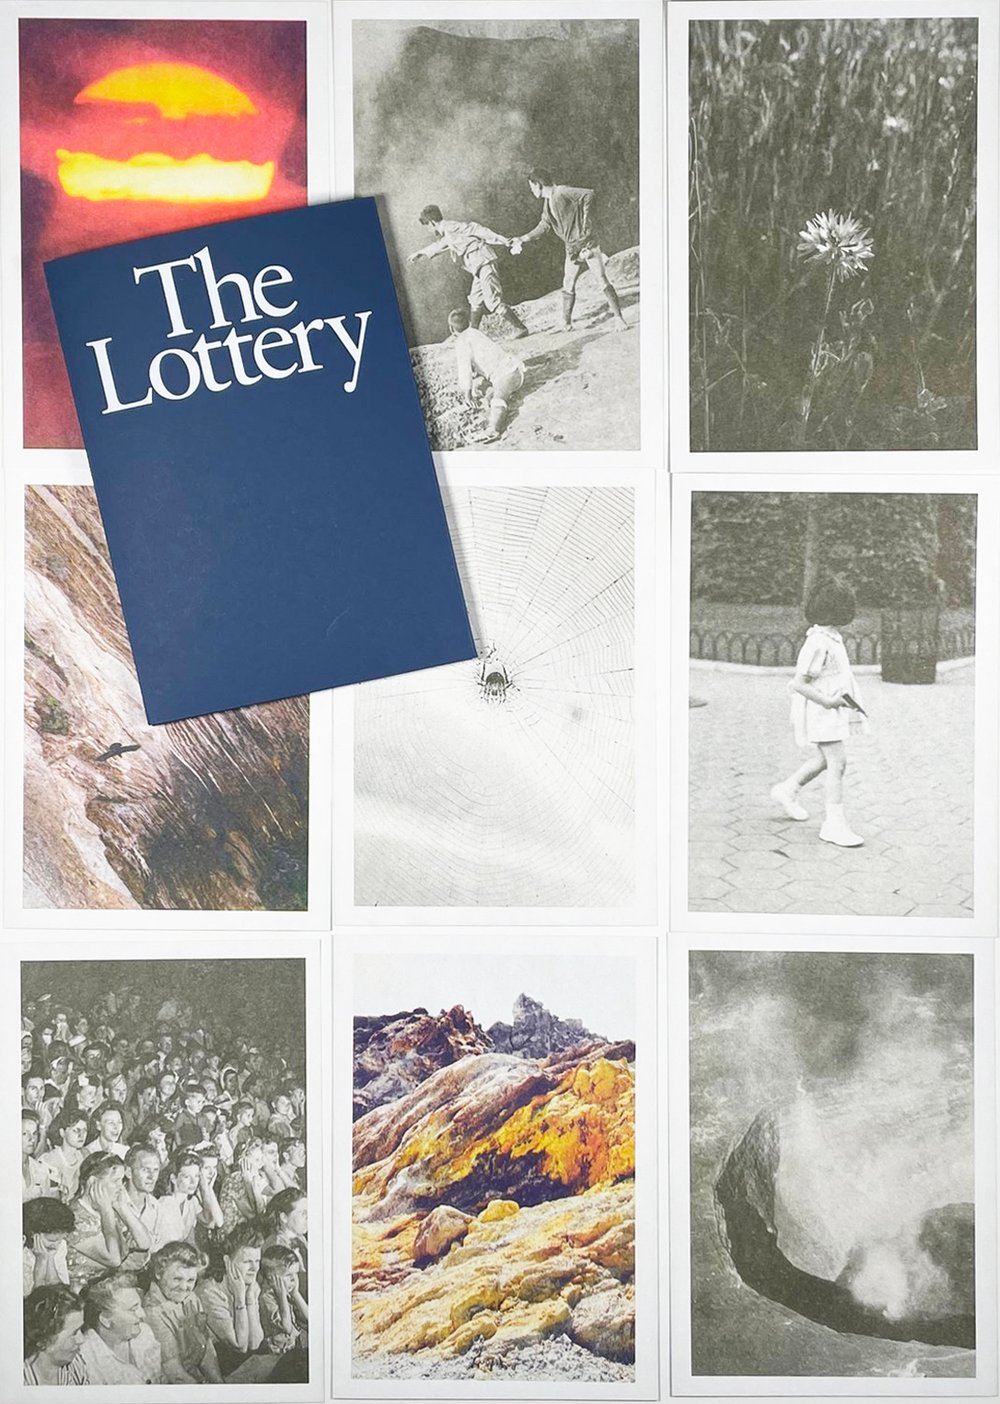 Image of The Lottery by Melissa Catanese